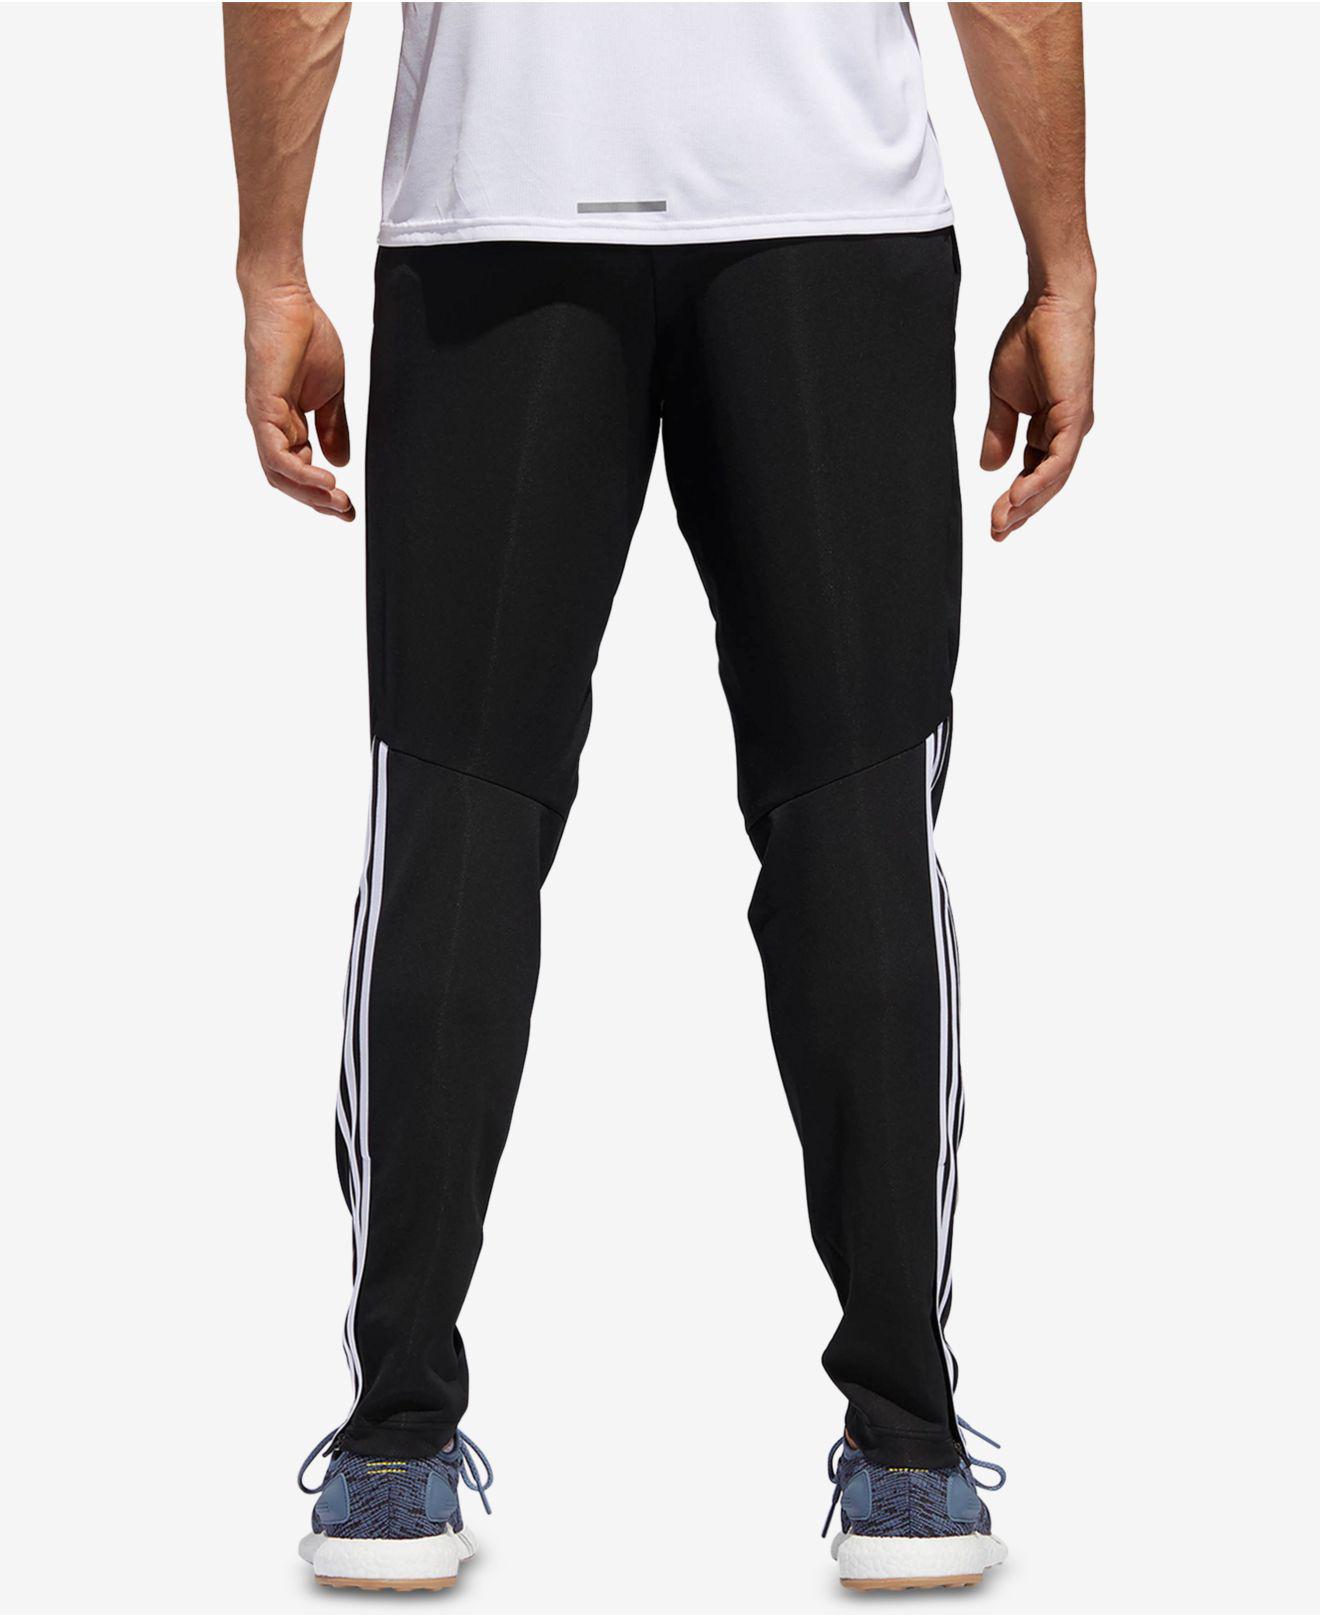 adidas Synthetic Response Climalite® Running Pants in Black for Men - Lyst